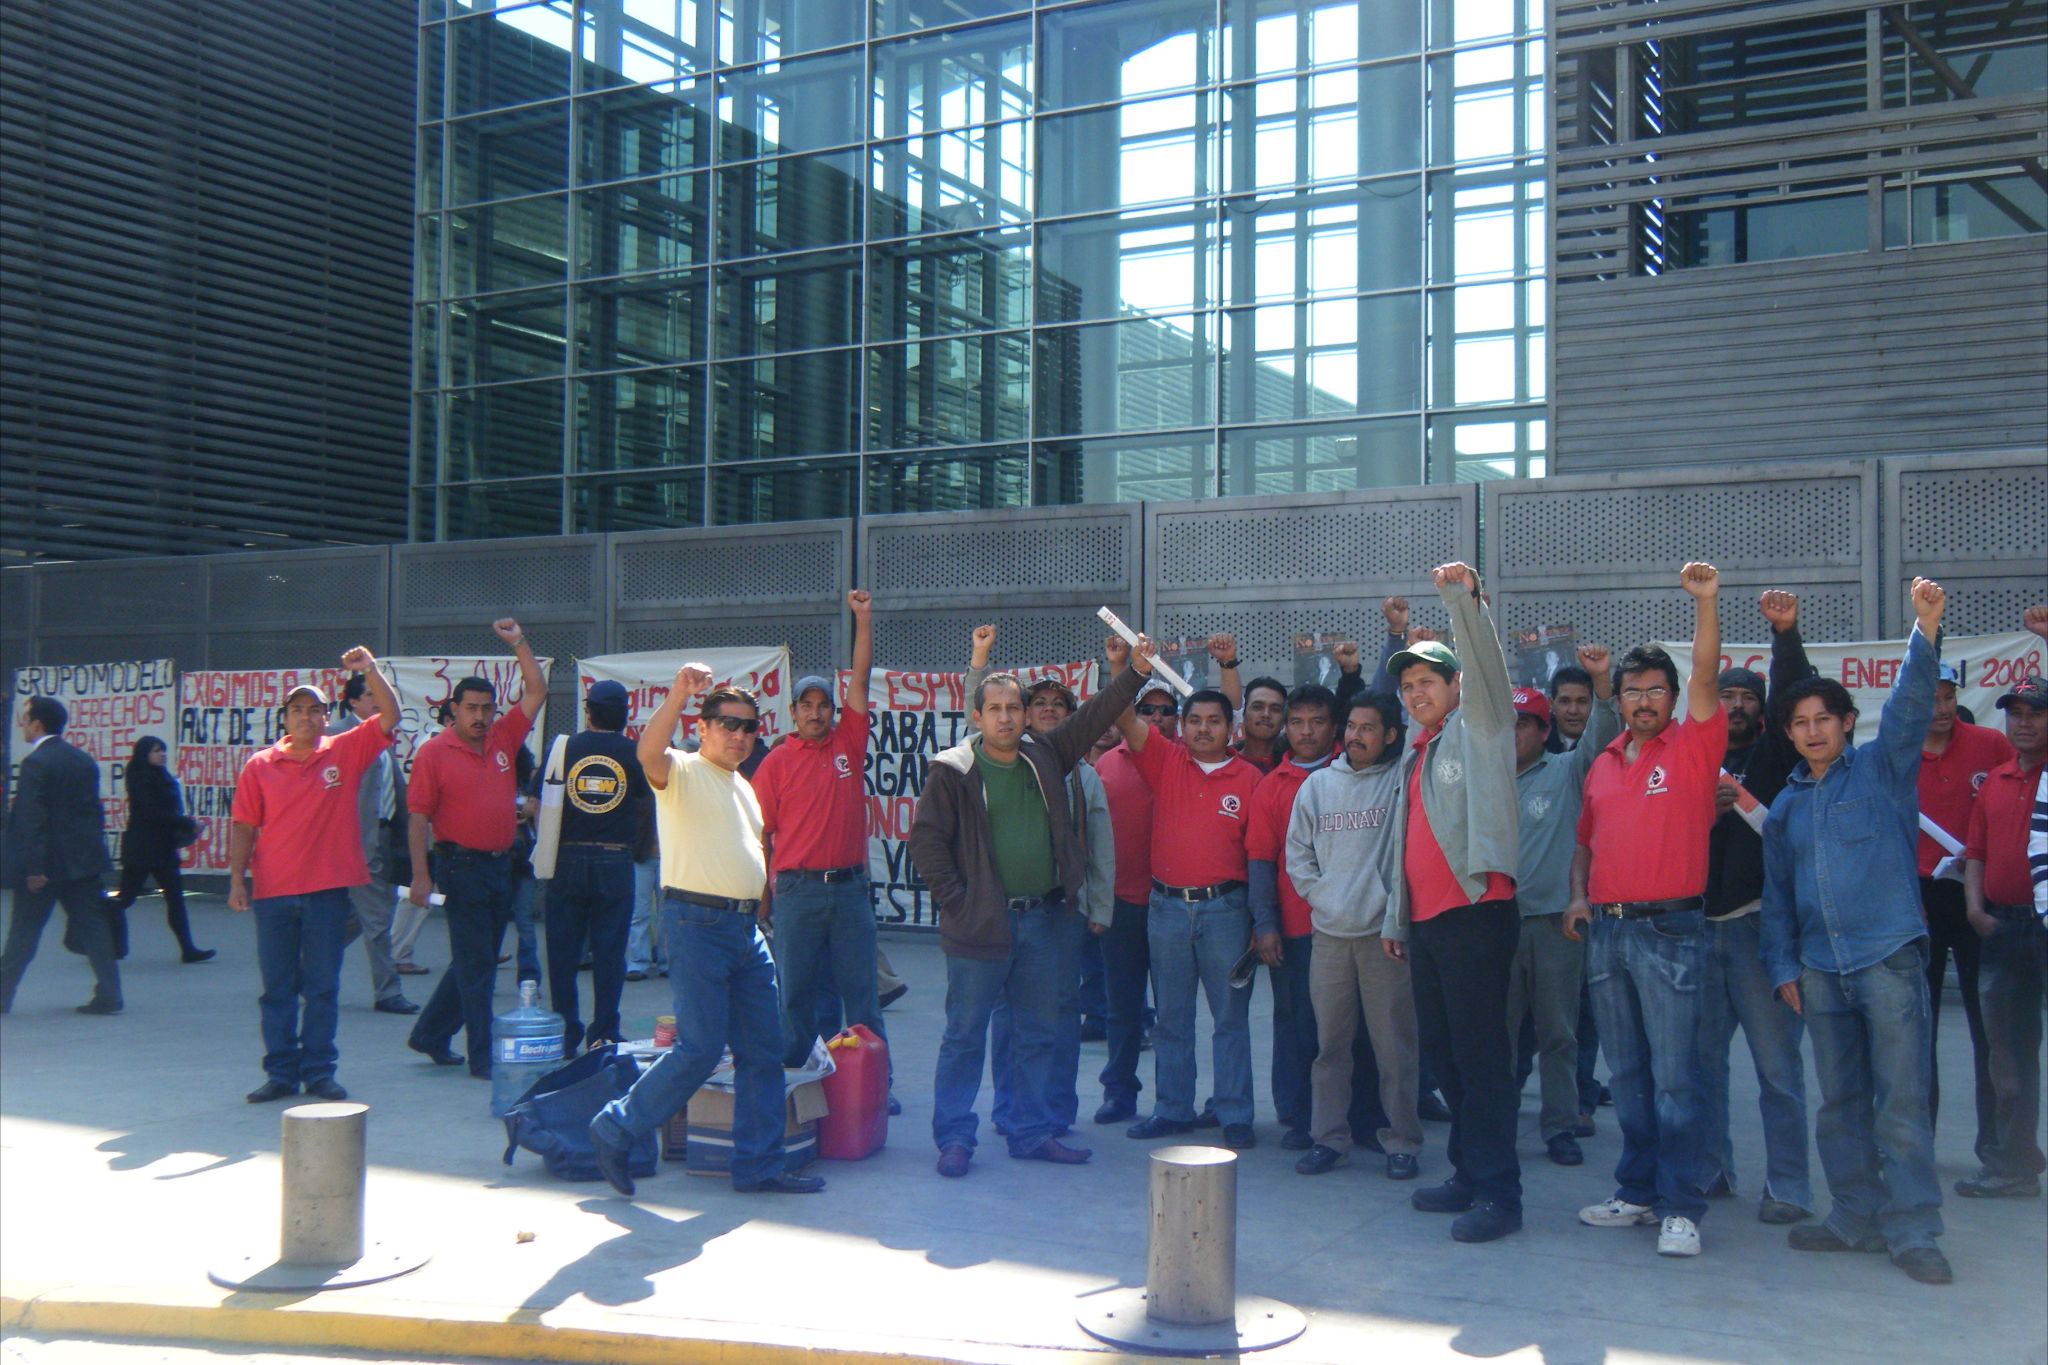 Five years of struggle – Mexican glass workers mobilize | IndustriALL